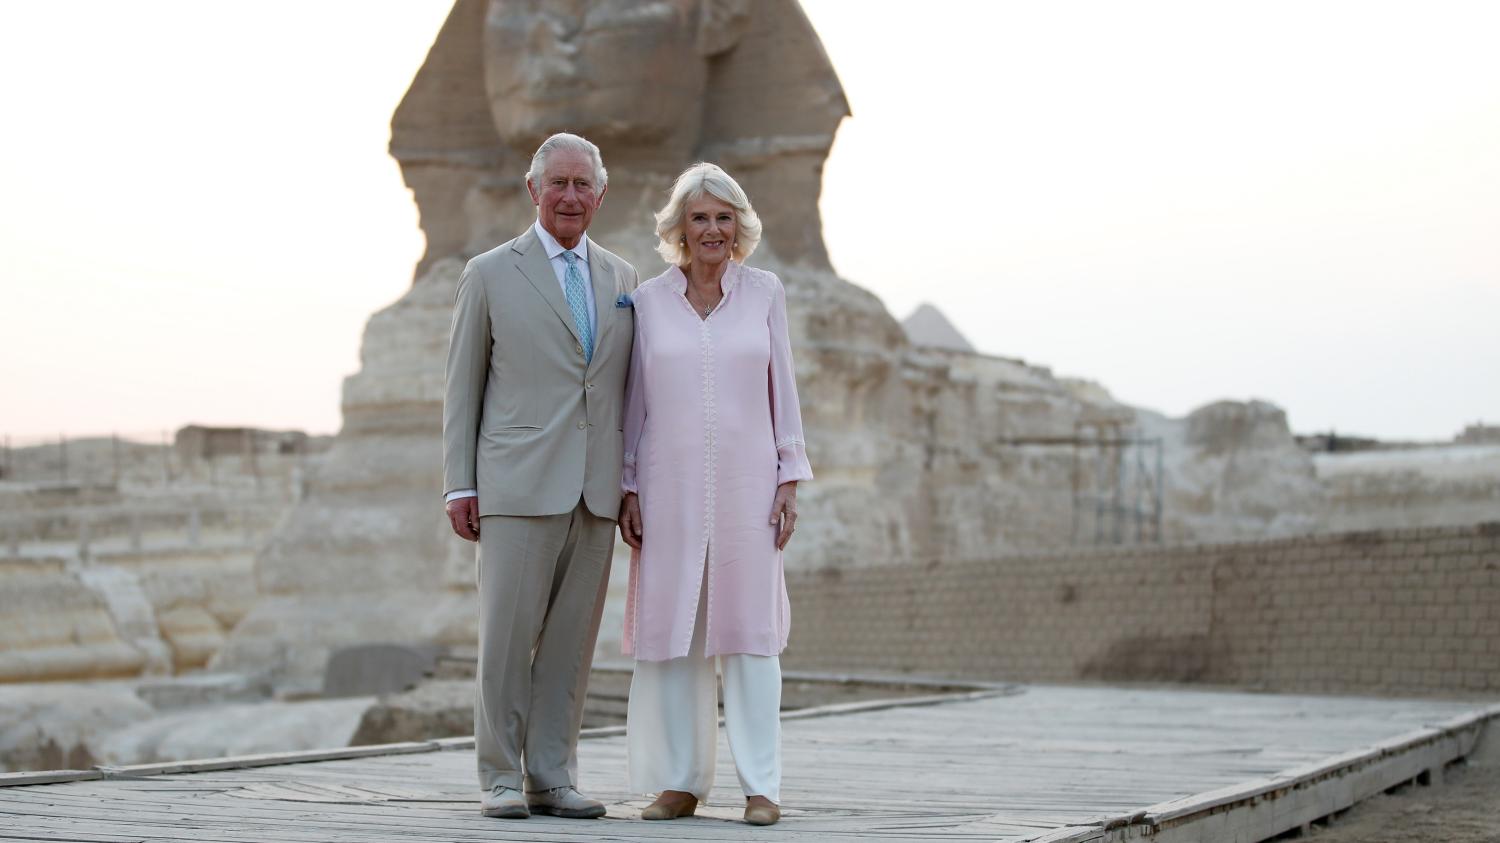 Charles III and Camilla visit the Sphinx in Egypt on their tour in 2021